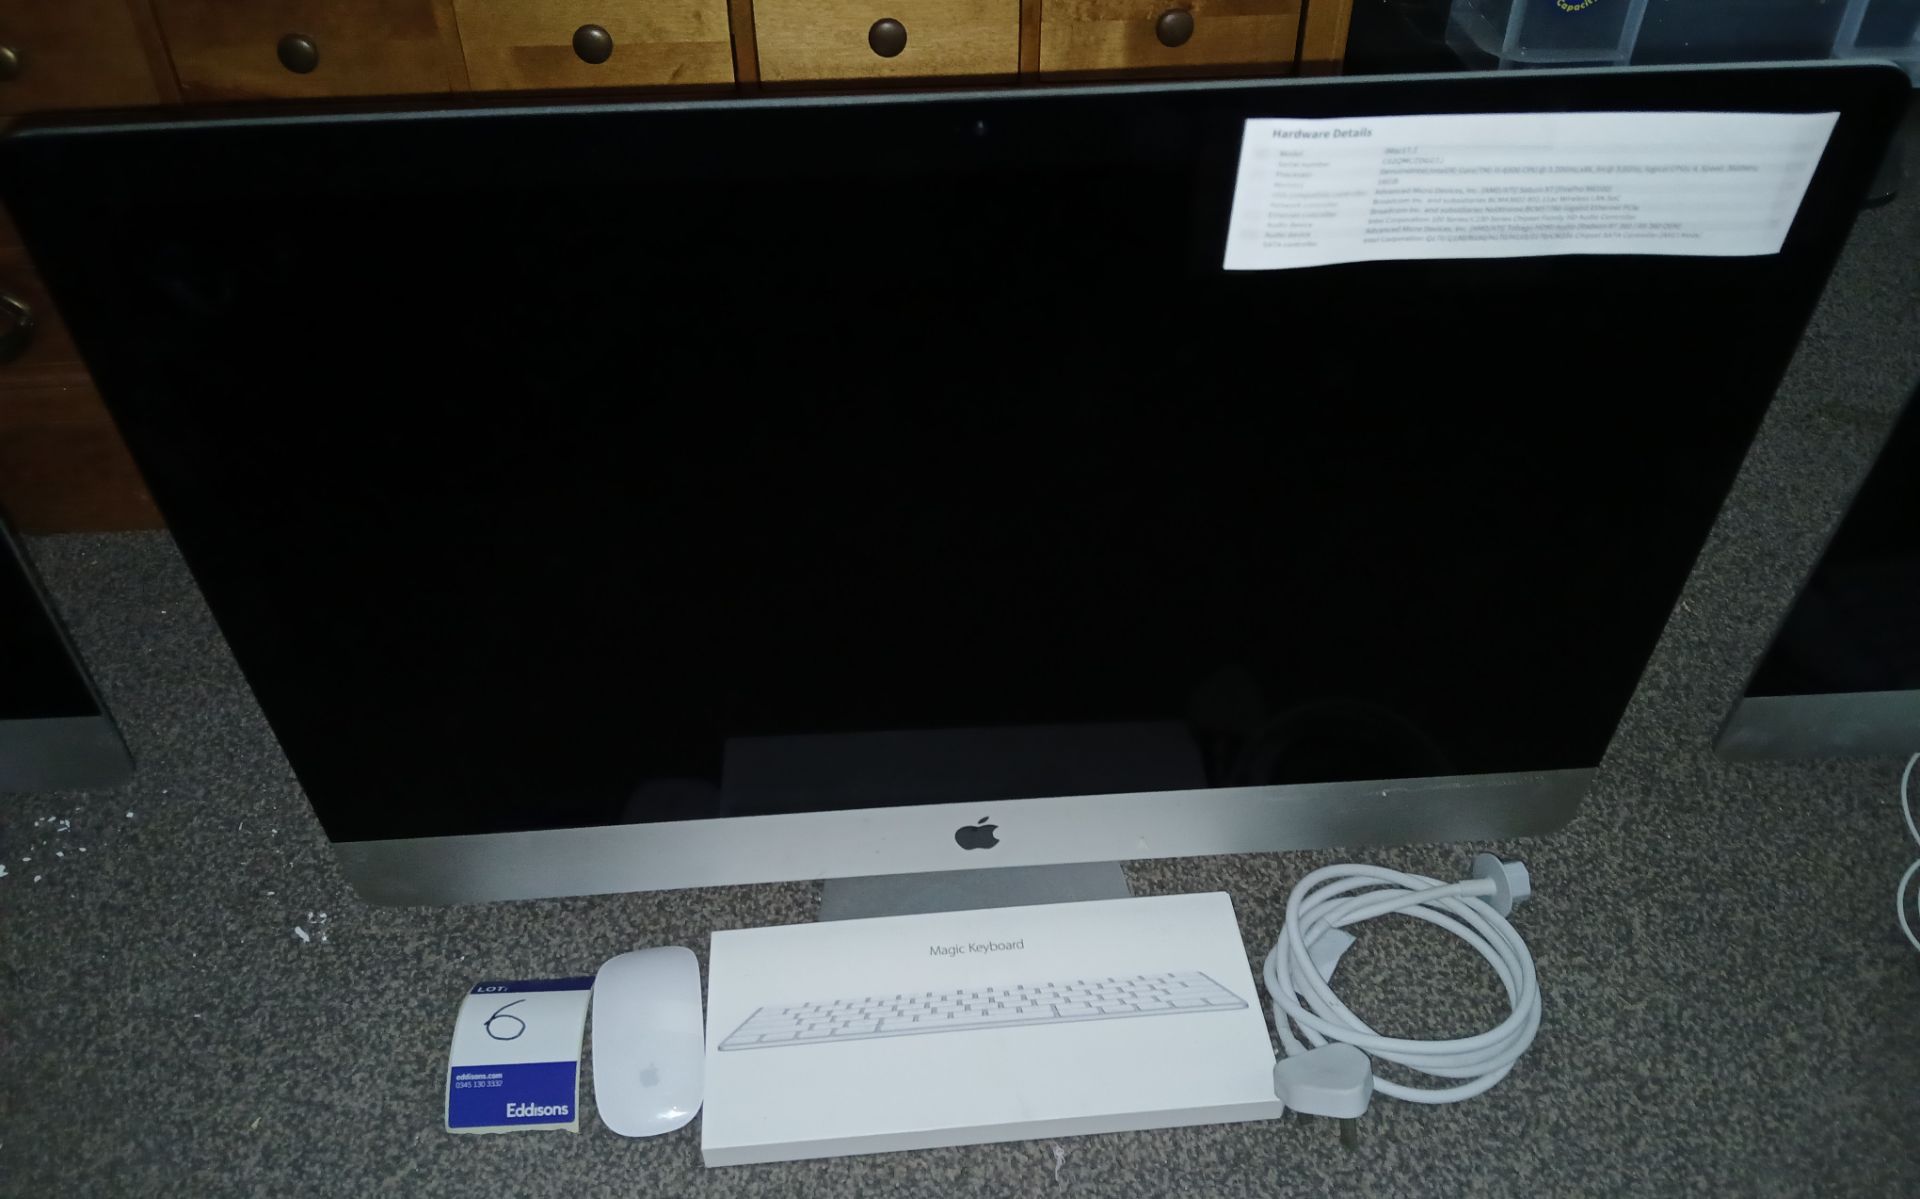 Apple iMac (Retina 5K, 27”, Late 2015) with Power Cable, Keyboard and Mouse, Serial Number